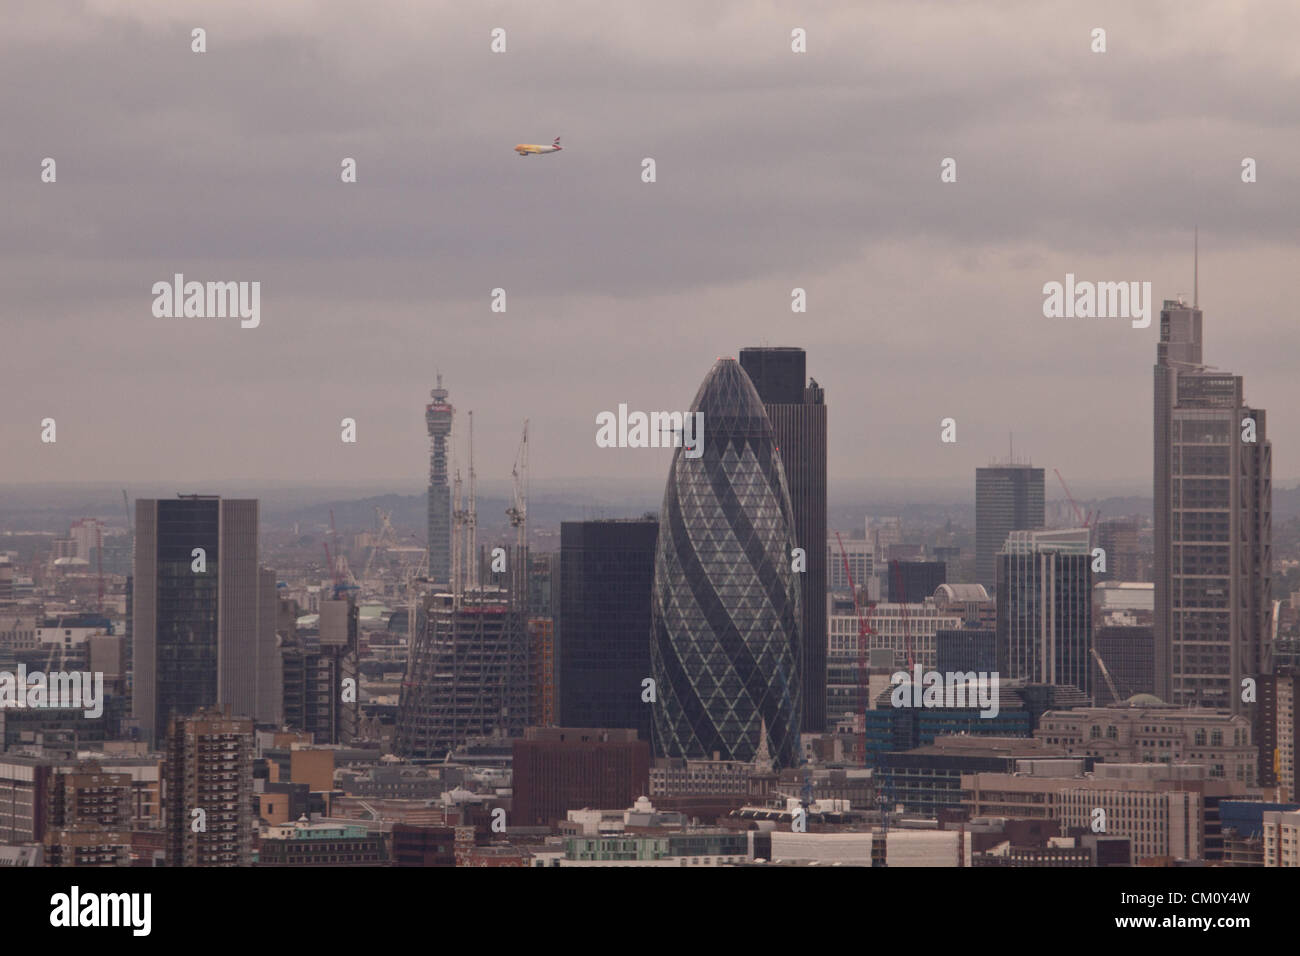 LONDON, UK, 10th Sep, 2012. The British Airways Airbus 'Firefly' performs a flypast over London as a tribute to the Team GB Olympic and Paralympic athletes. Credit:  Steve Bright / Alamy Live News Stock Photo